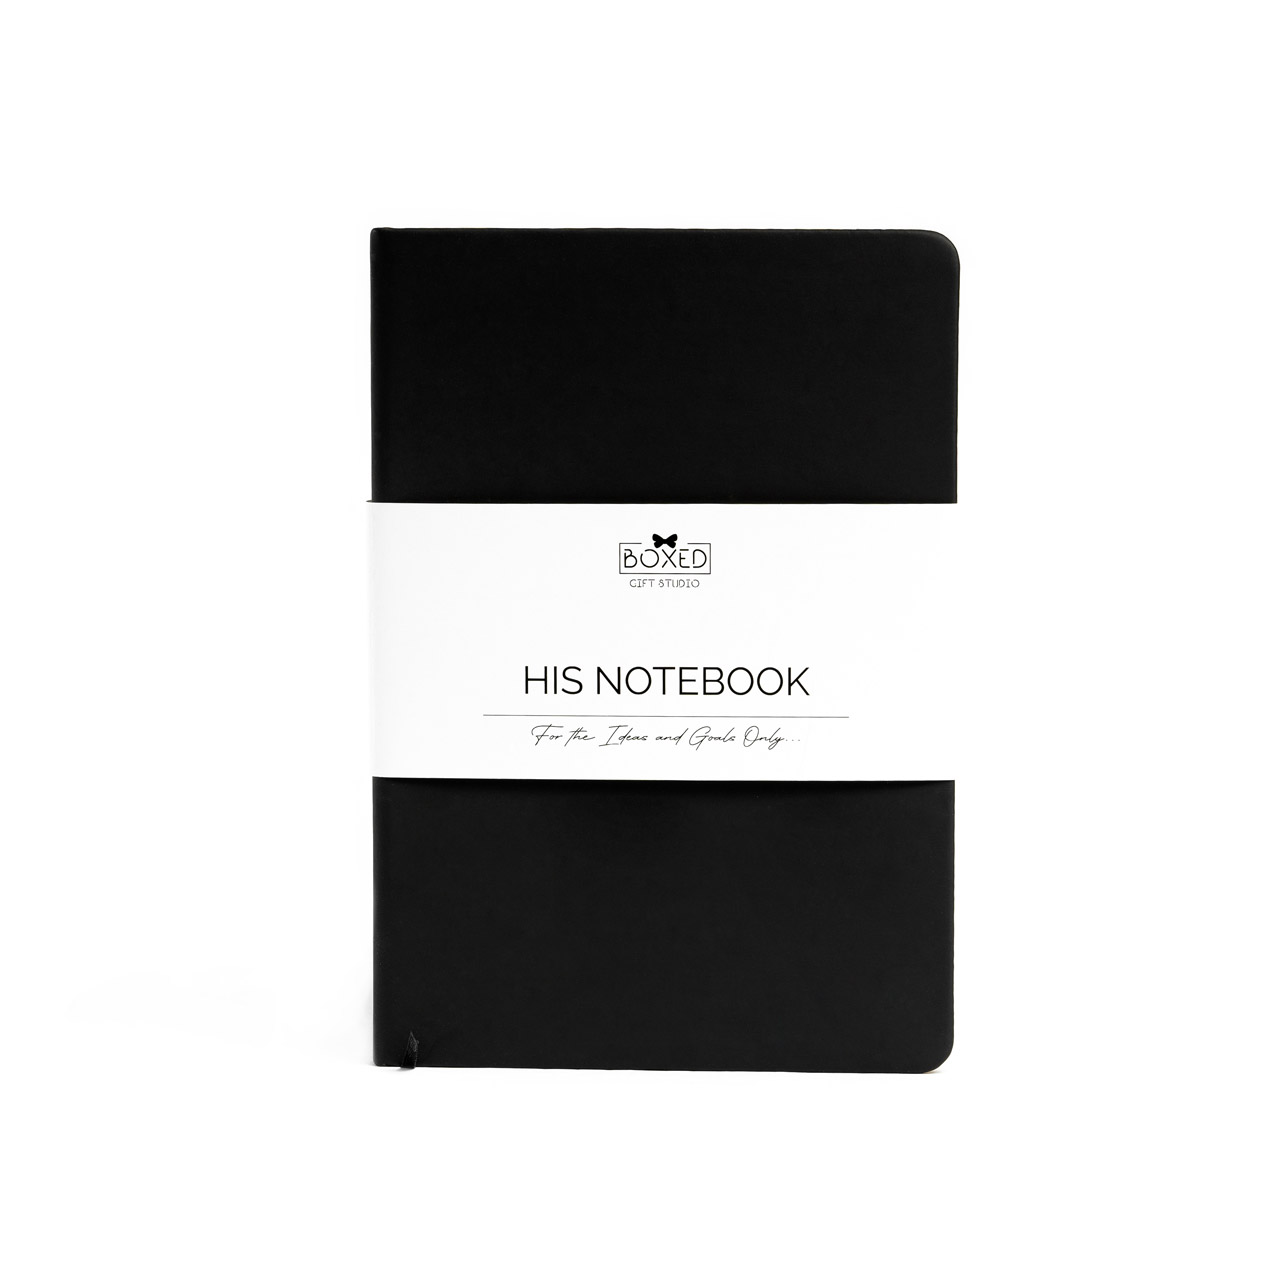 His Notebook | Boxed